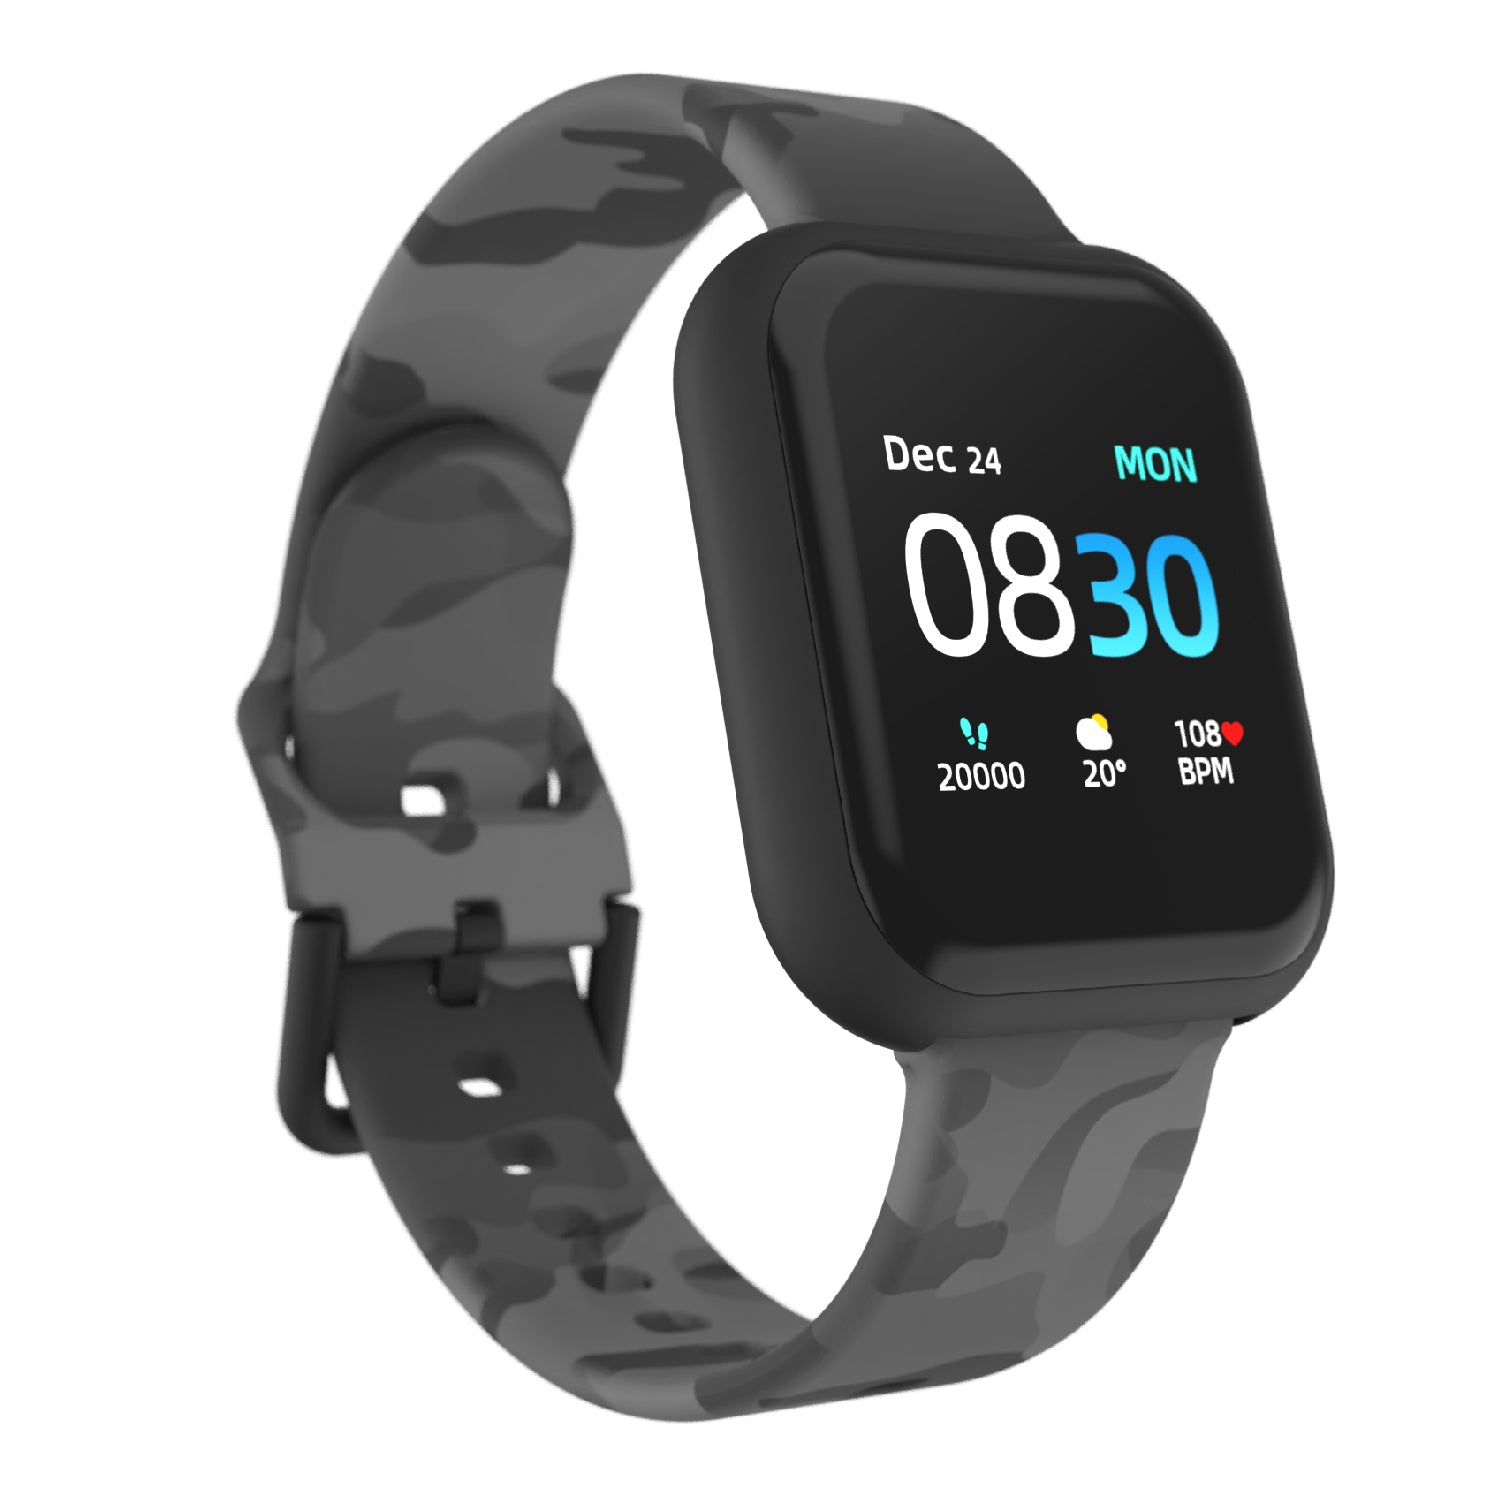 iTouch Air 3 Smartwatch in Black with Grey Camo Strap